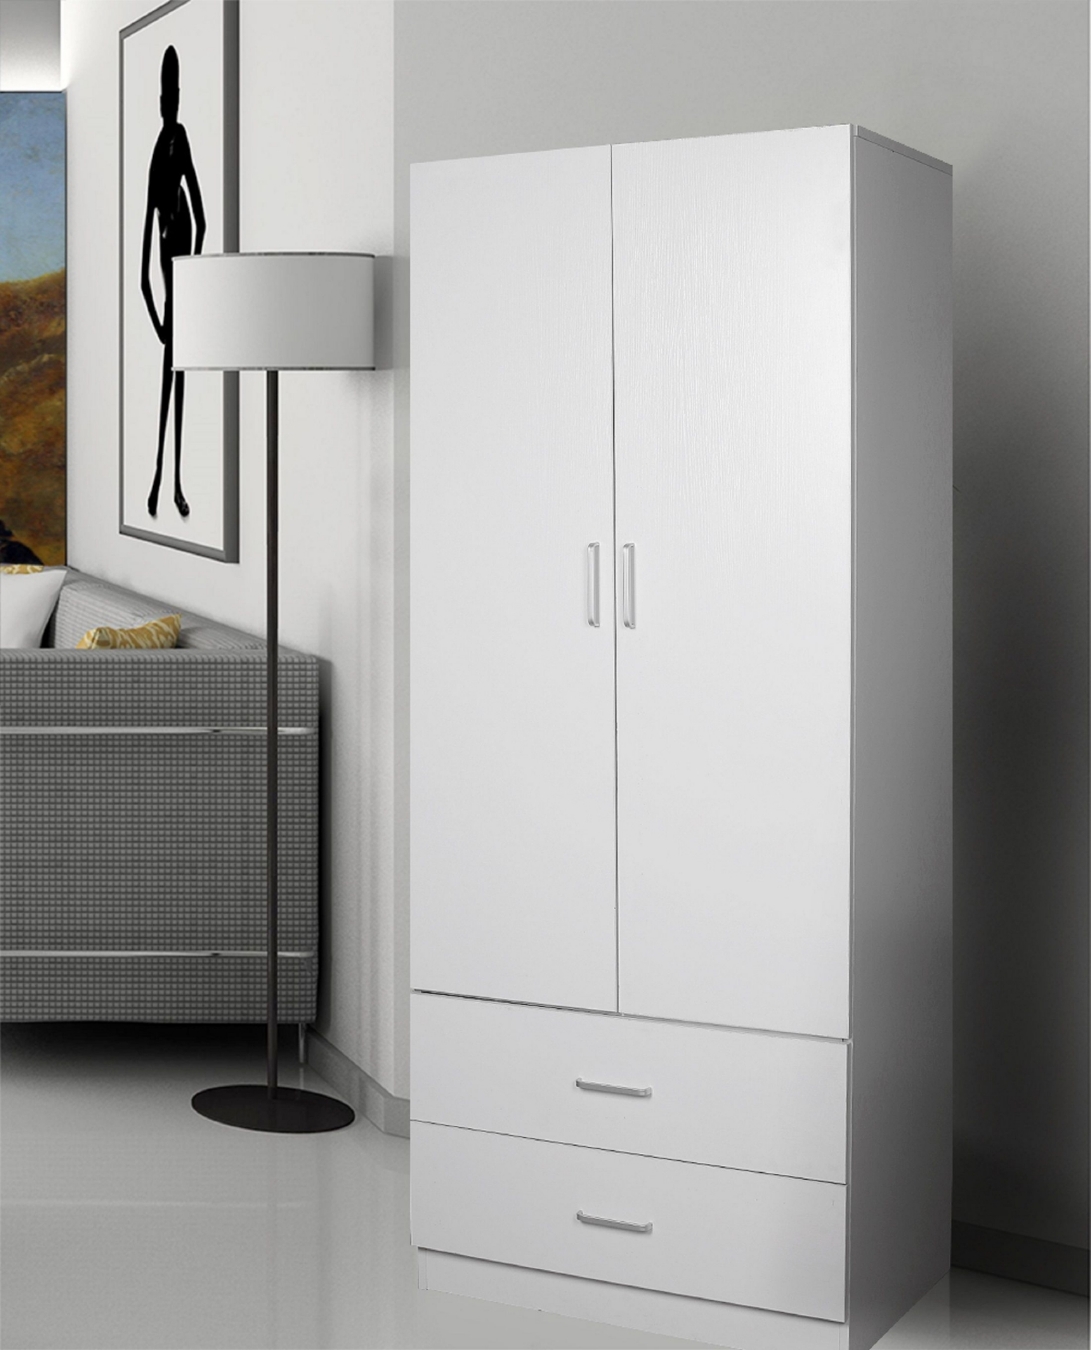 Simple and sleek, the HEQS Redfern 2 Door Wardrobe will bring handy storage and functionality to your home.